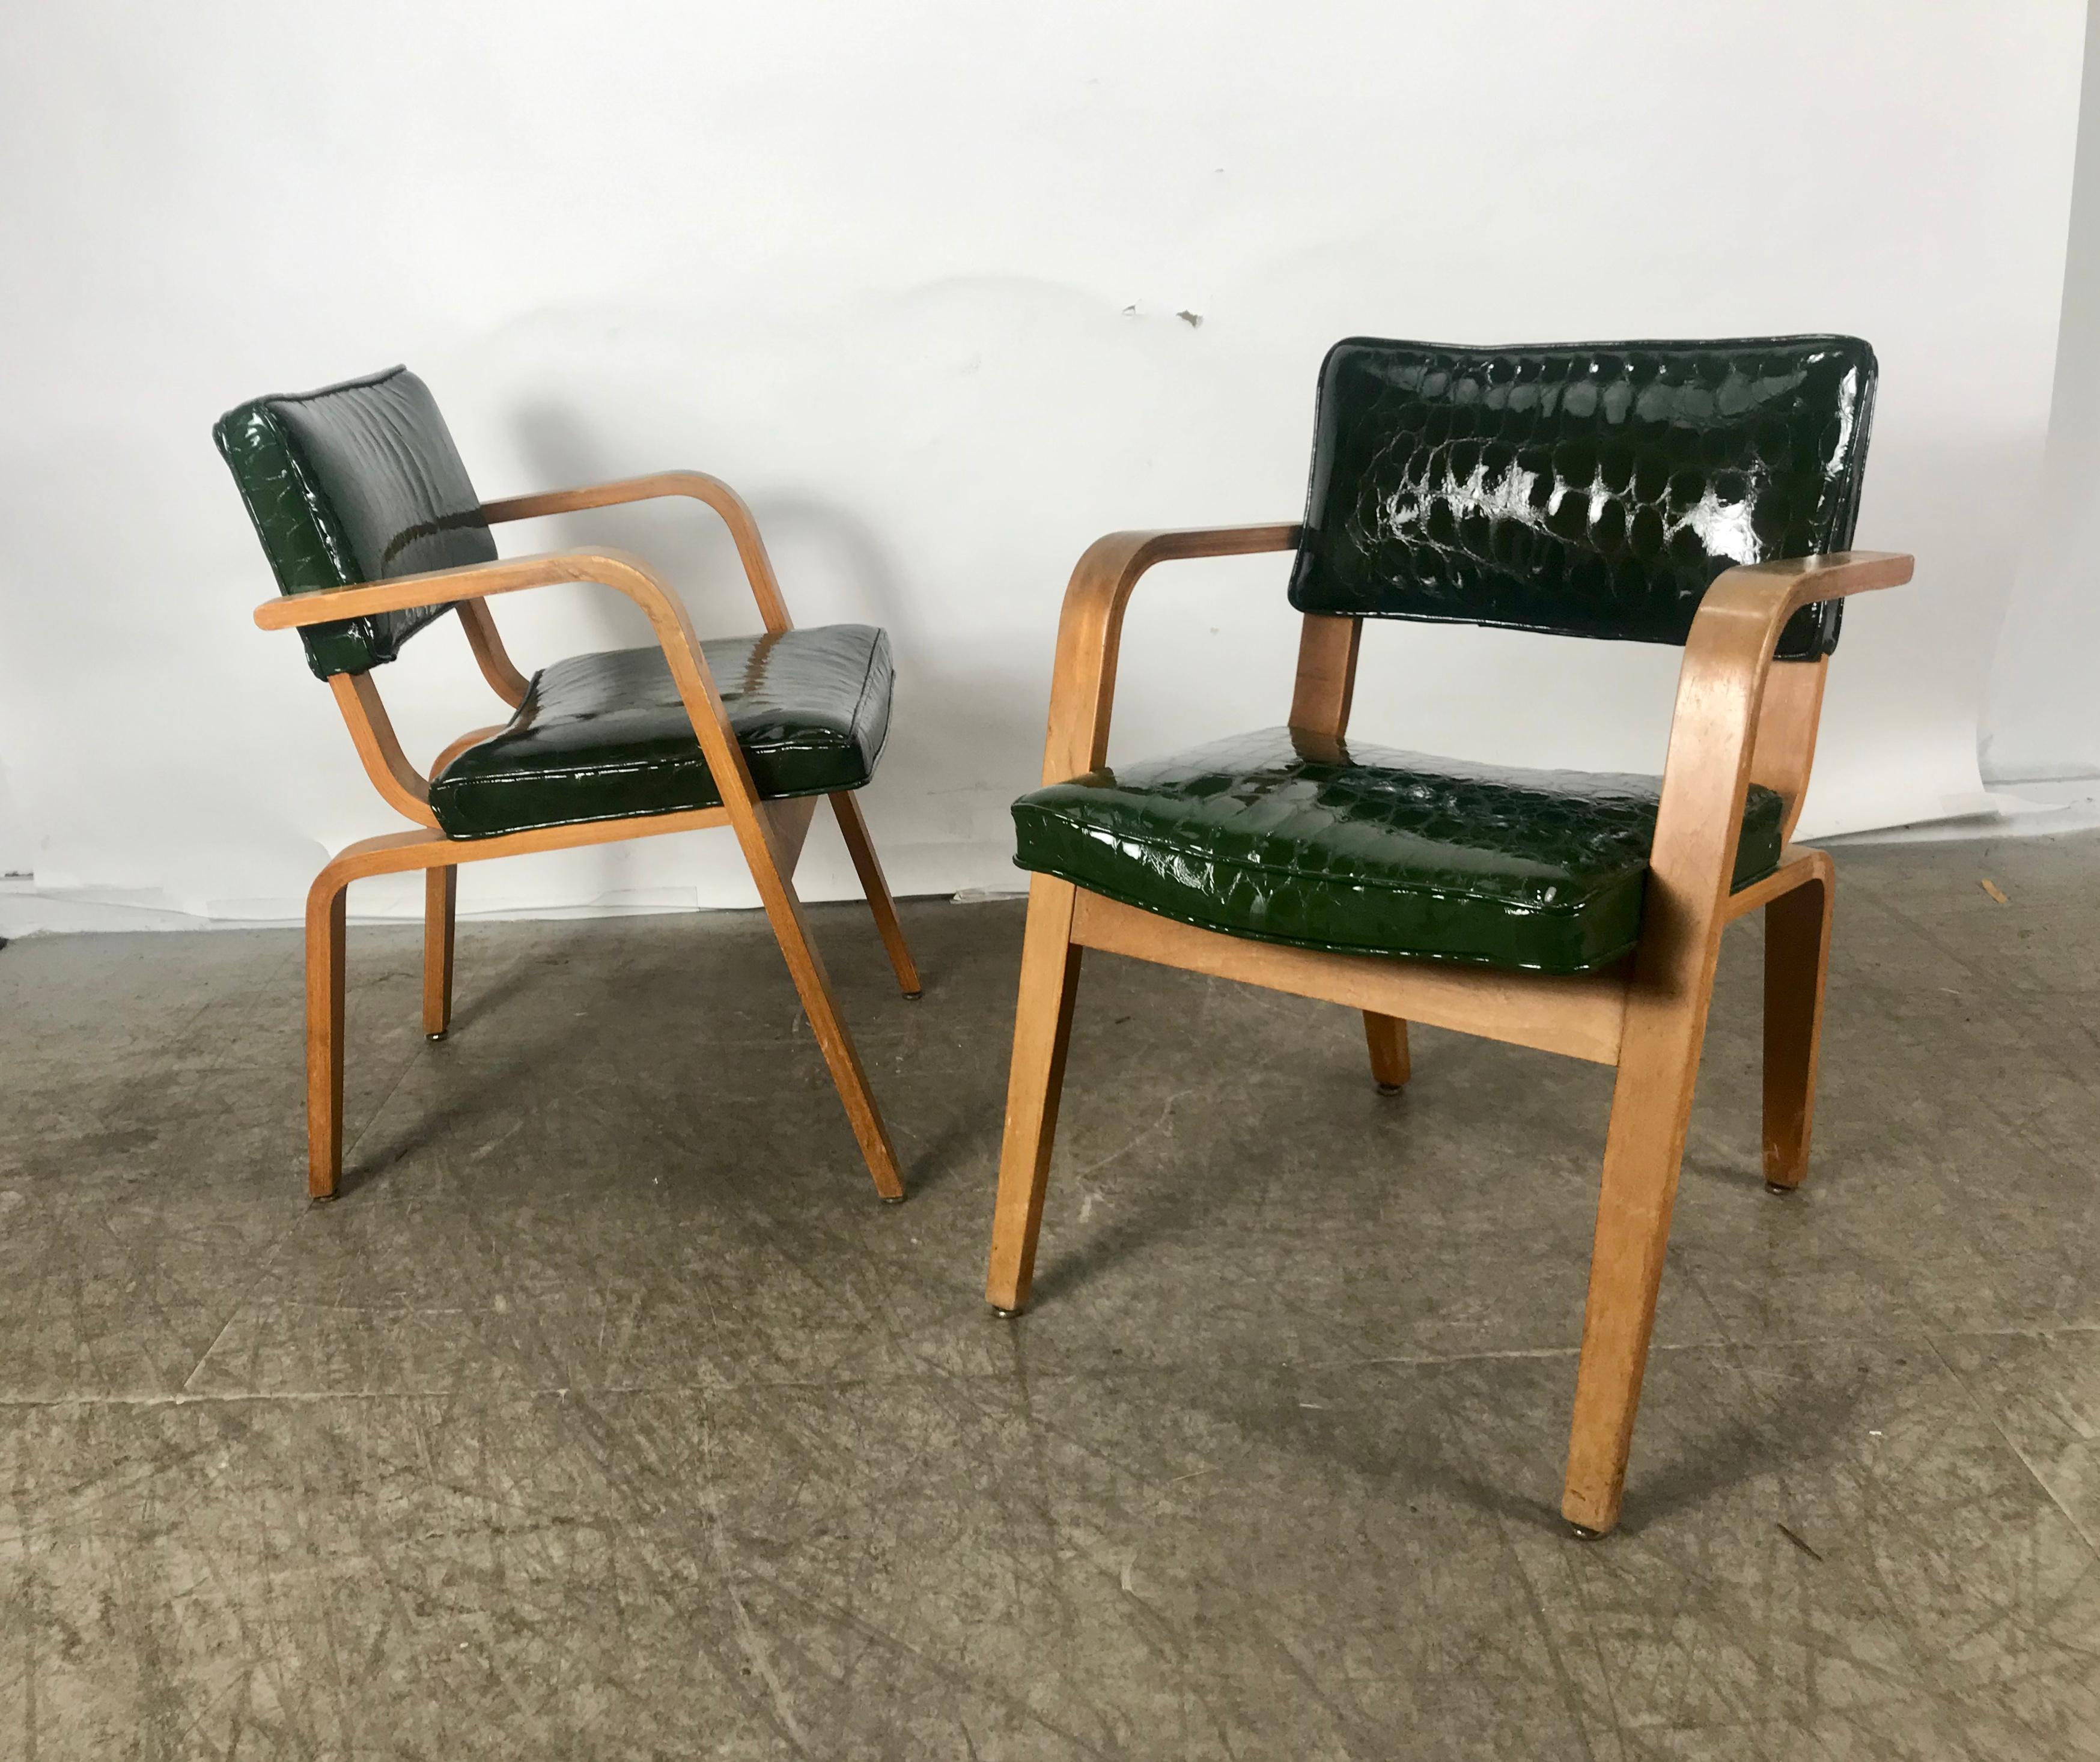 Pair of Modernist Thonet Bent Wood and Alligator Patent Leather Lounge Chairs 2